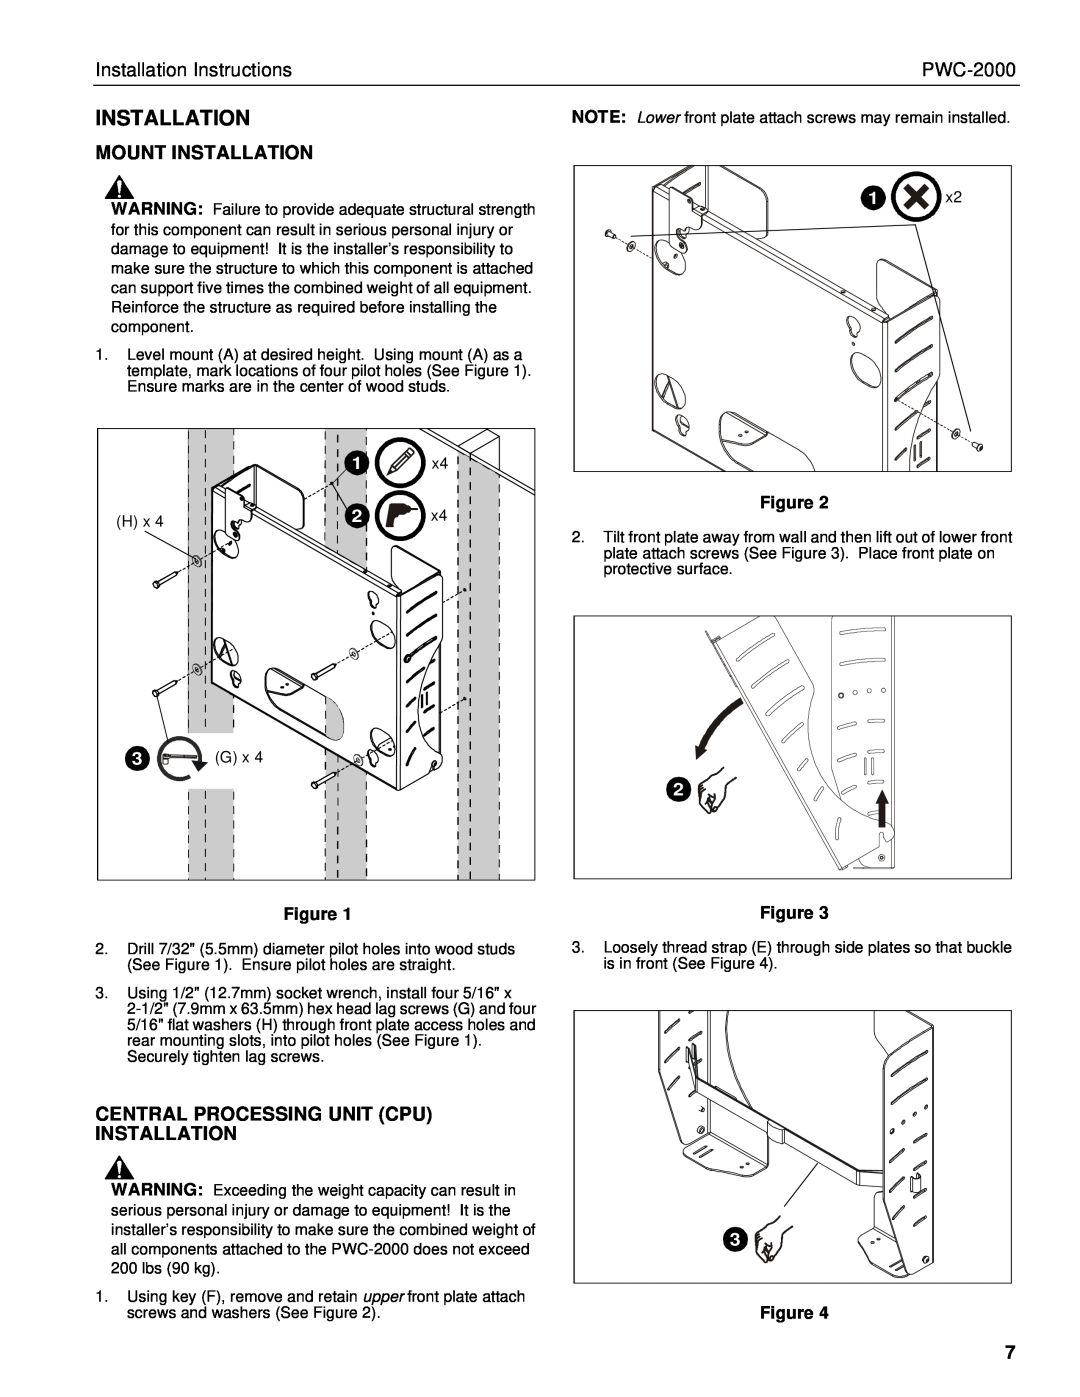 Chief Manufacturing PWC-2000 Mount Installation, Central Processing Unit Cpu Installation, Installation Instructions 